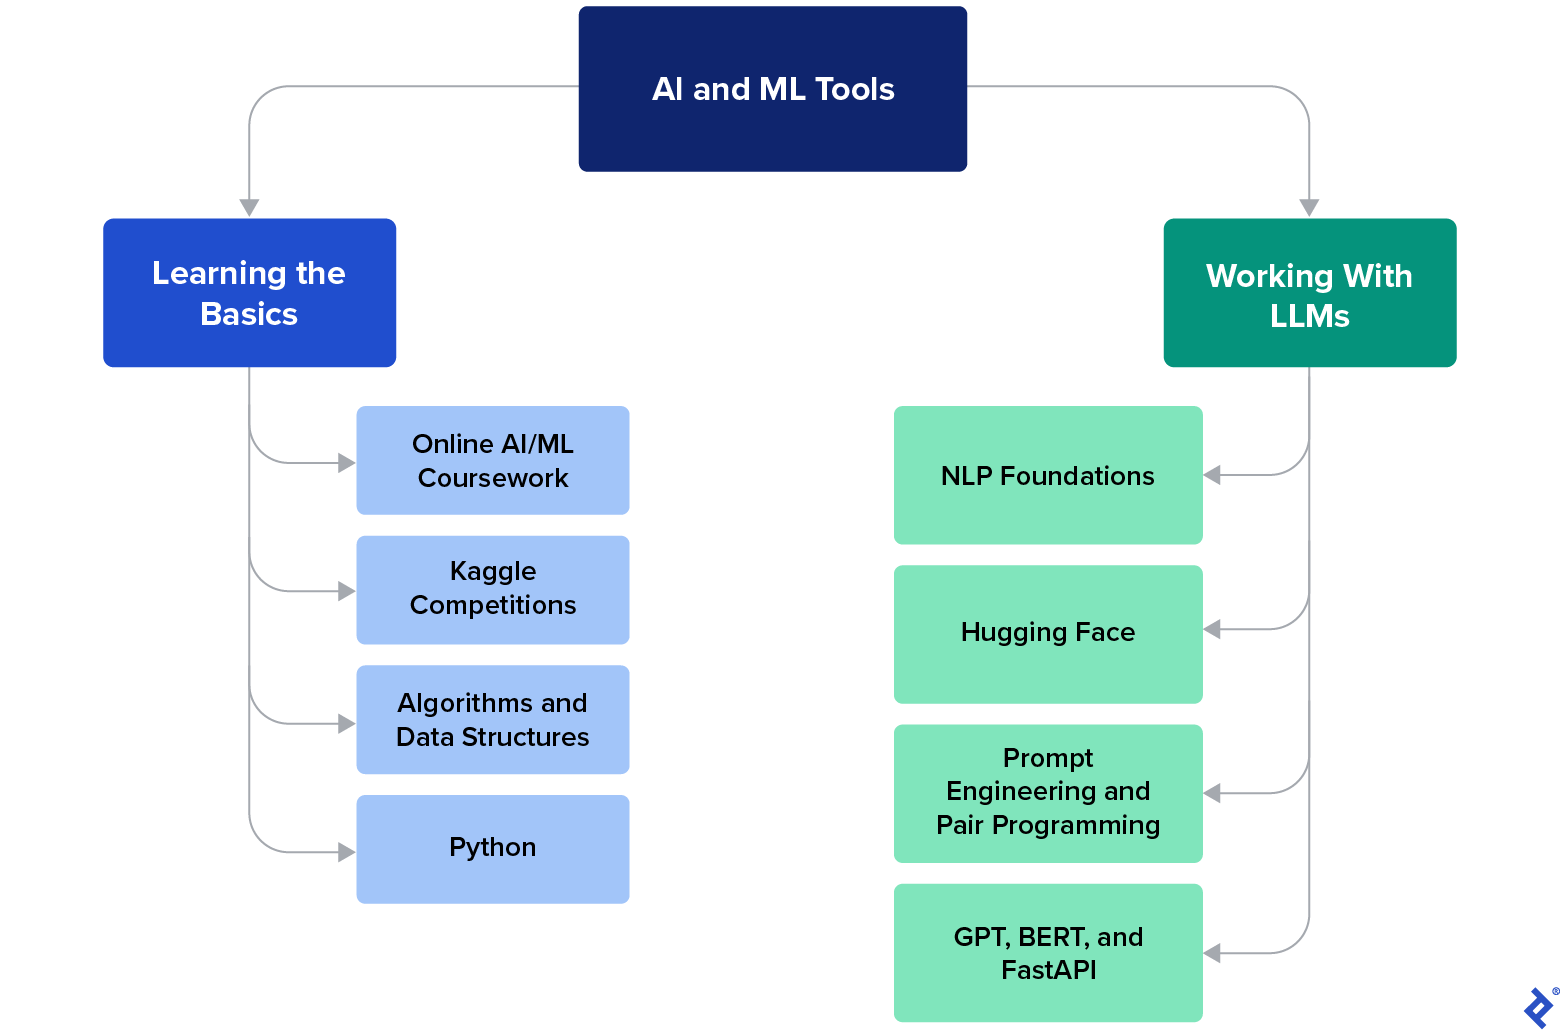 A chart of basic AI resources, such as Python and Kaggle competitions, and LLM tool recommendations, such as Hugging Face, GPT, BERT, and FastAPI.